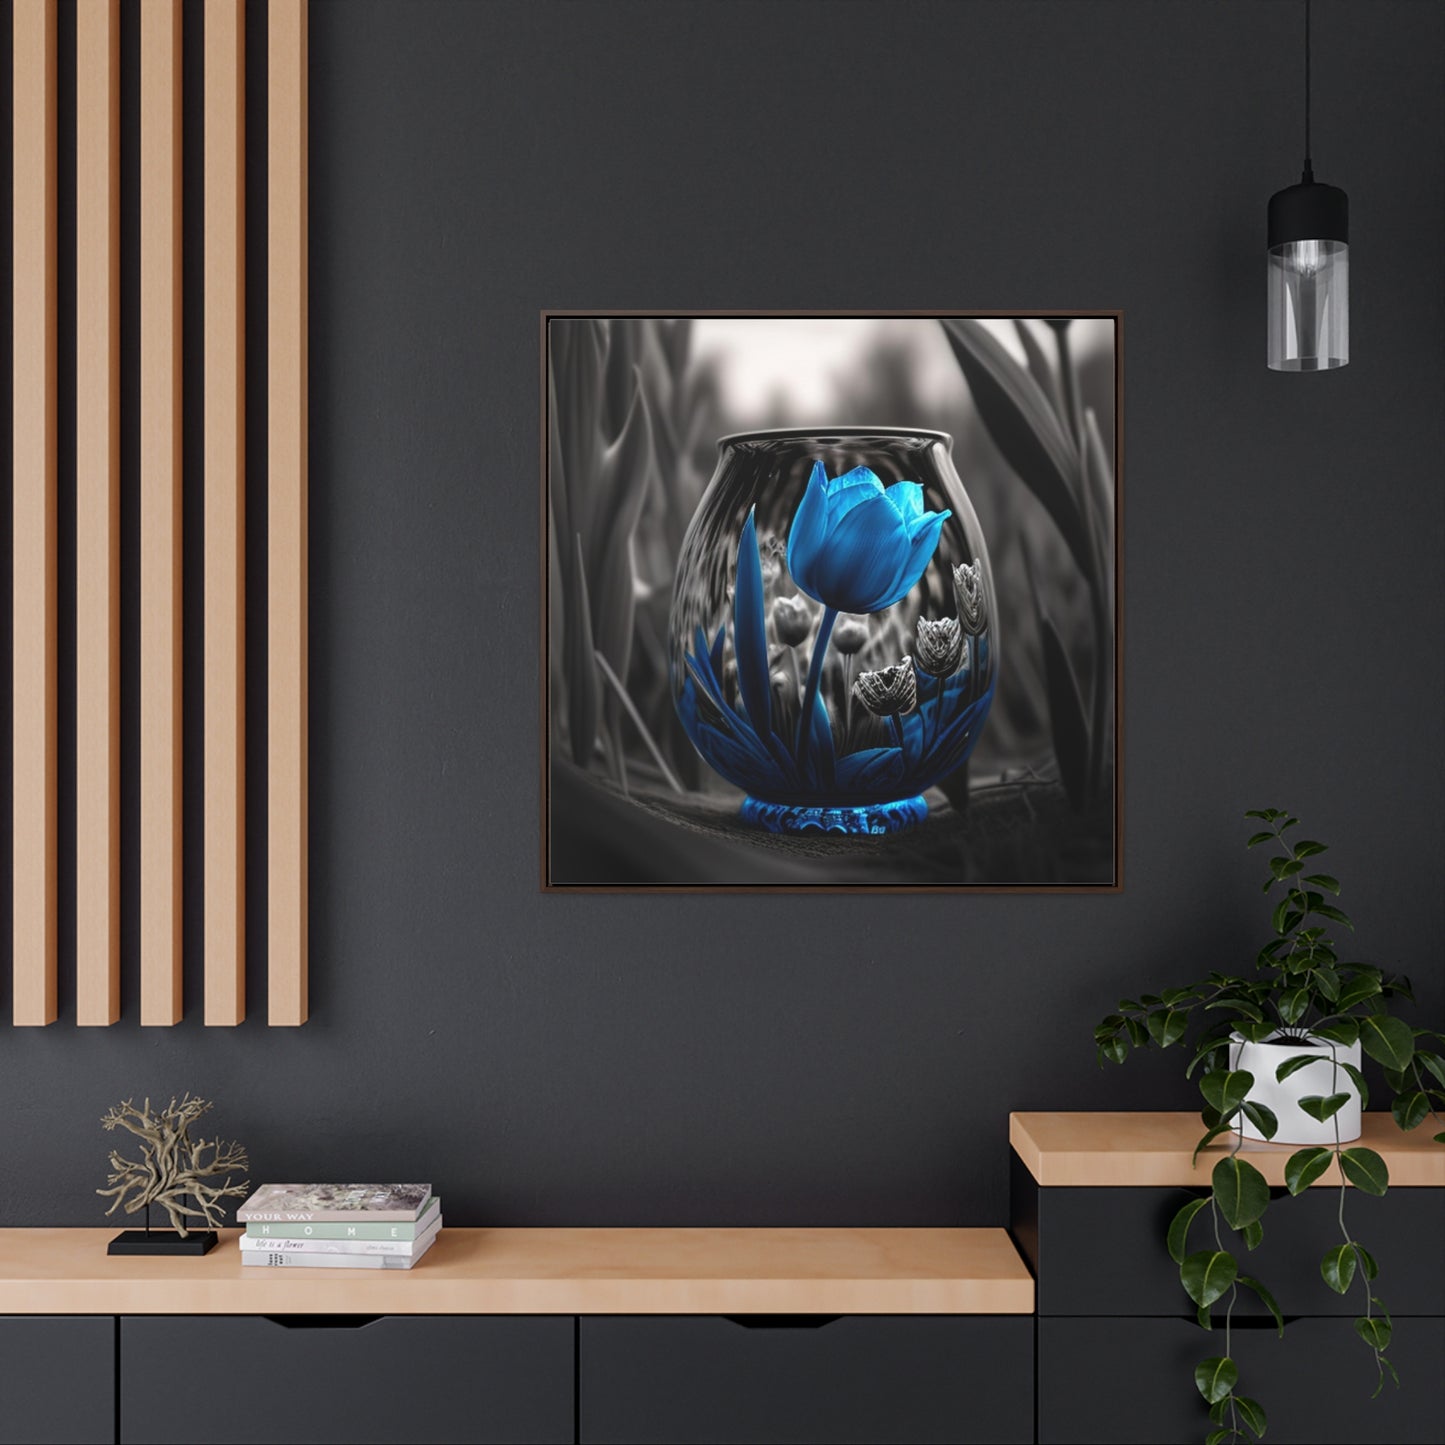 Gallery Canvas Wraps, Square Frame Tulip Blue 4